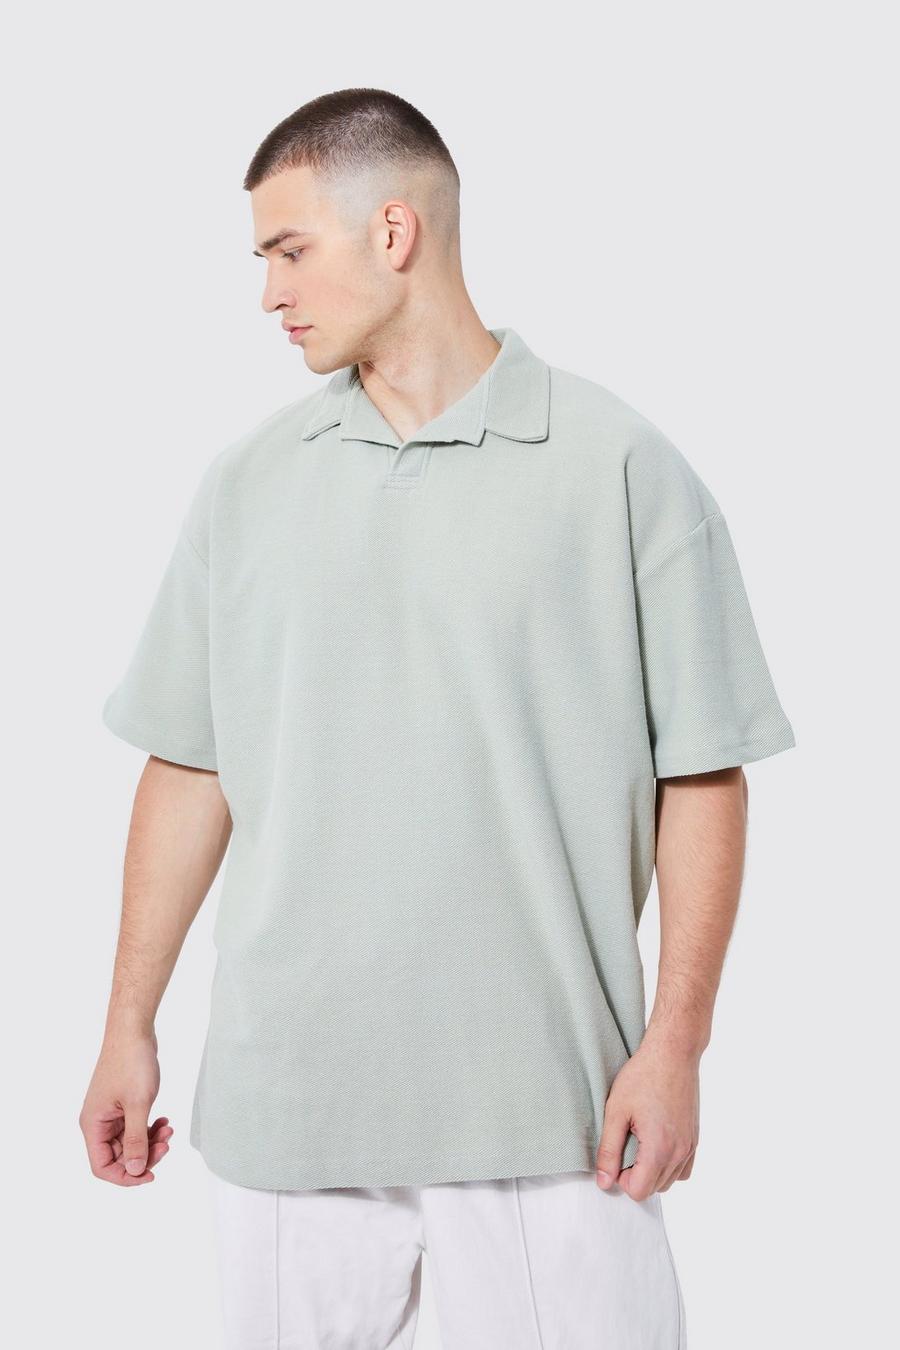 Sage Tall Oversized Jersey Keperstof Polo Met Revers Kraag image number 1